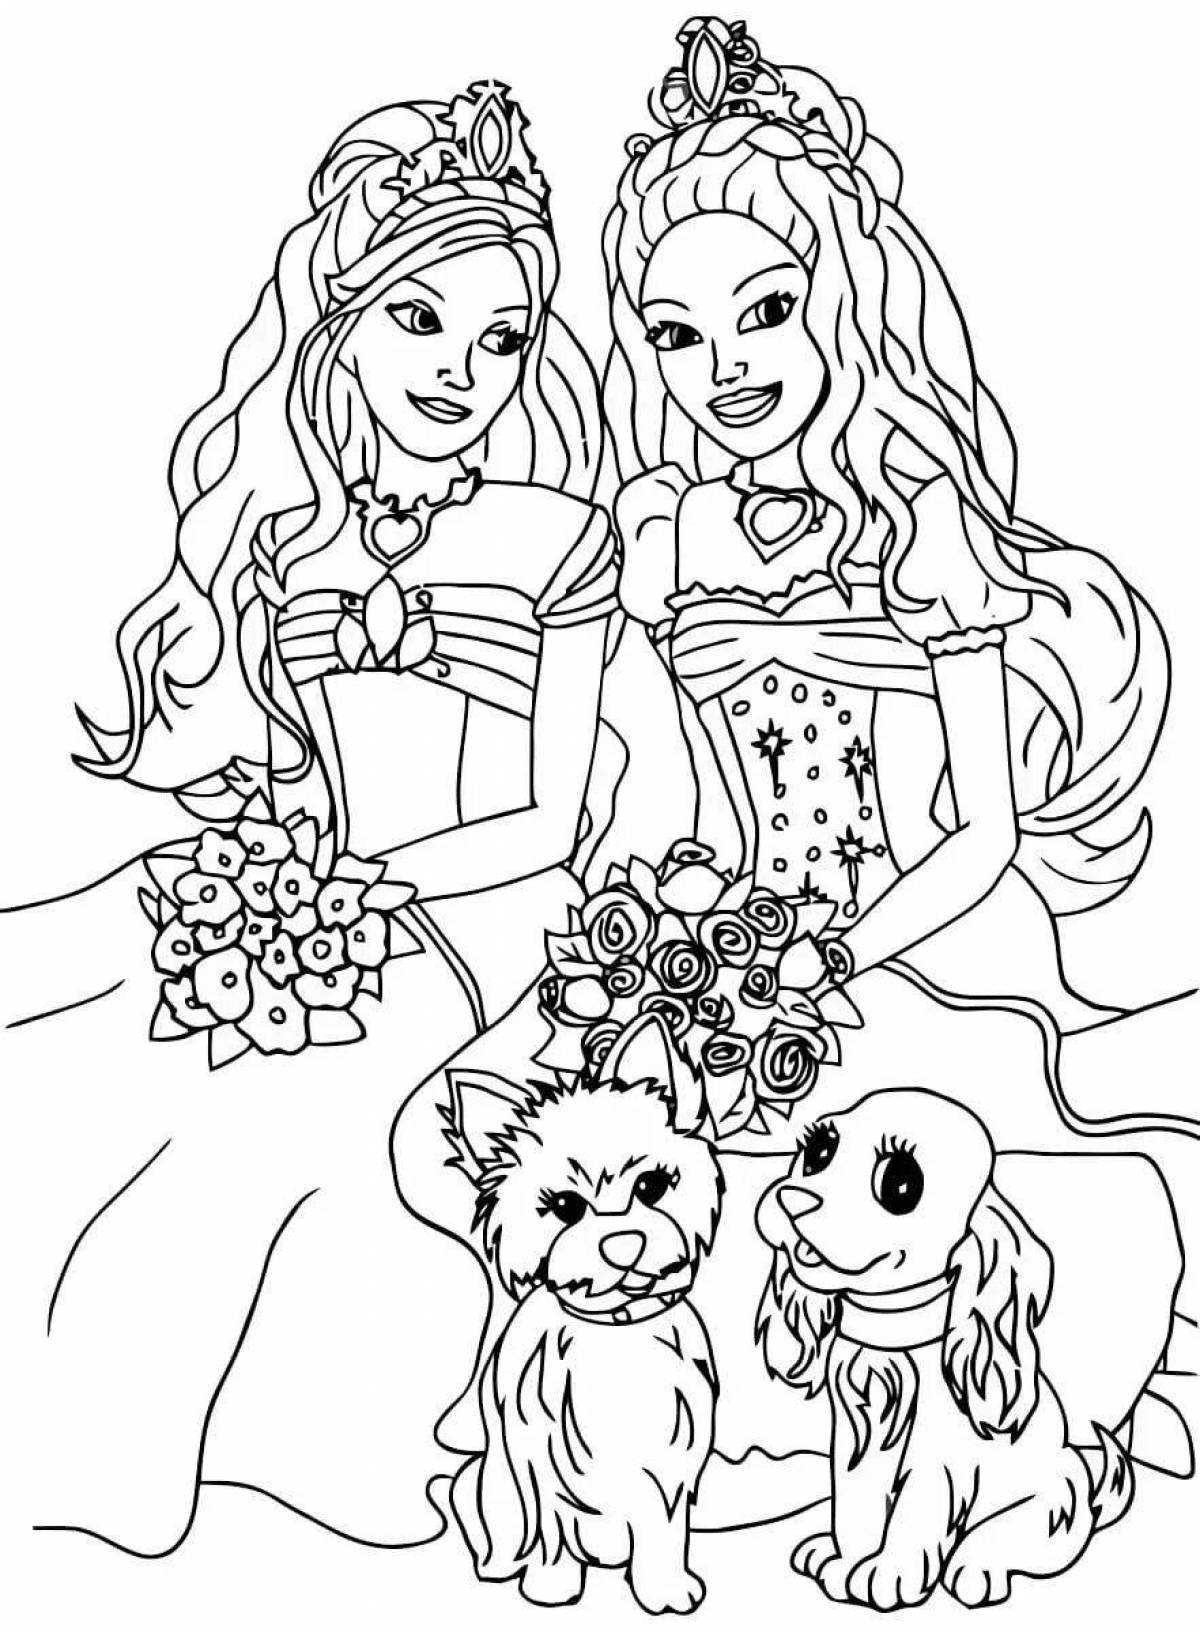 Glorious barbie coloring book for kids 6-7 years old